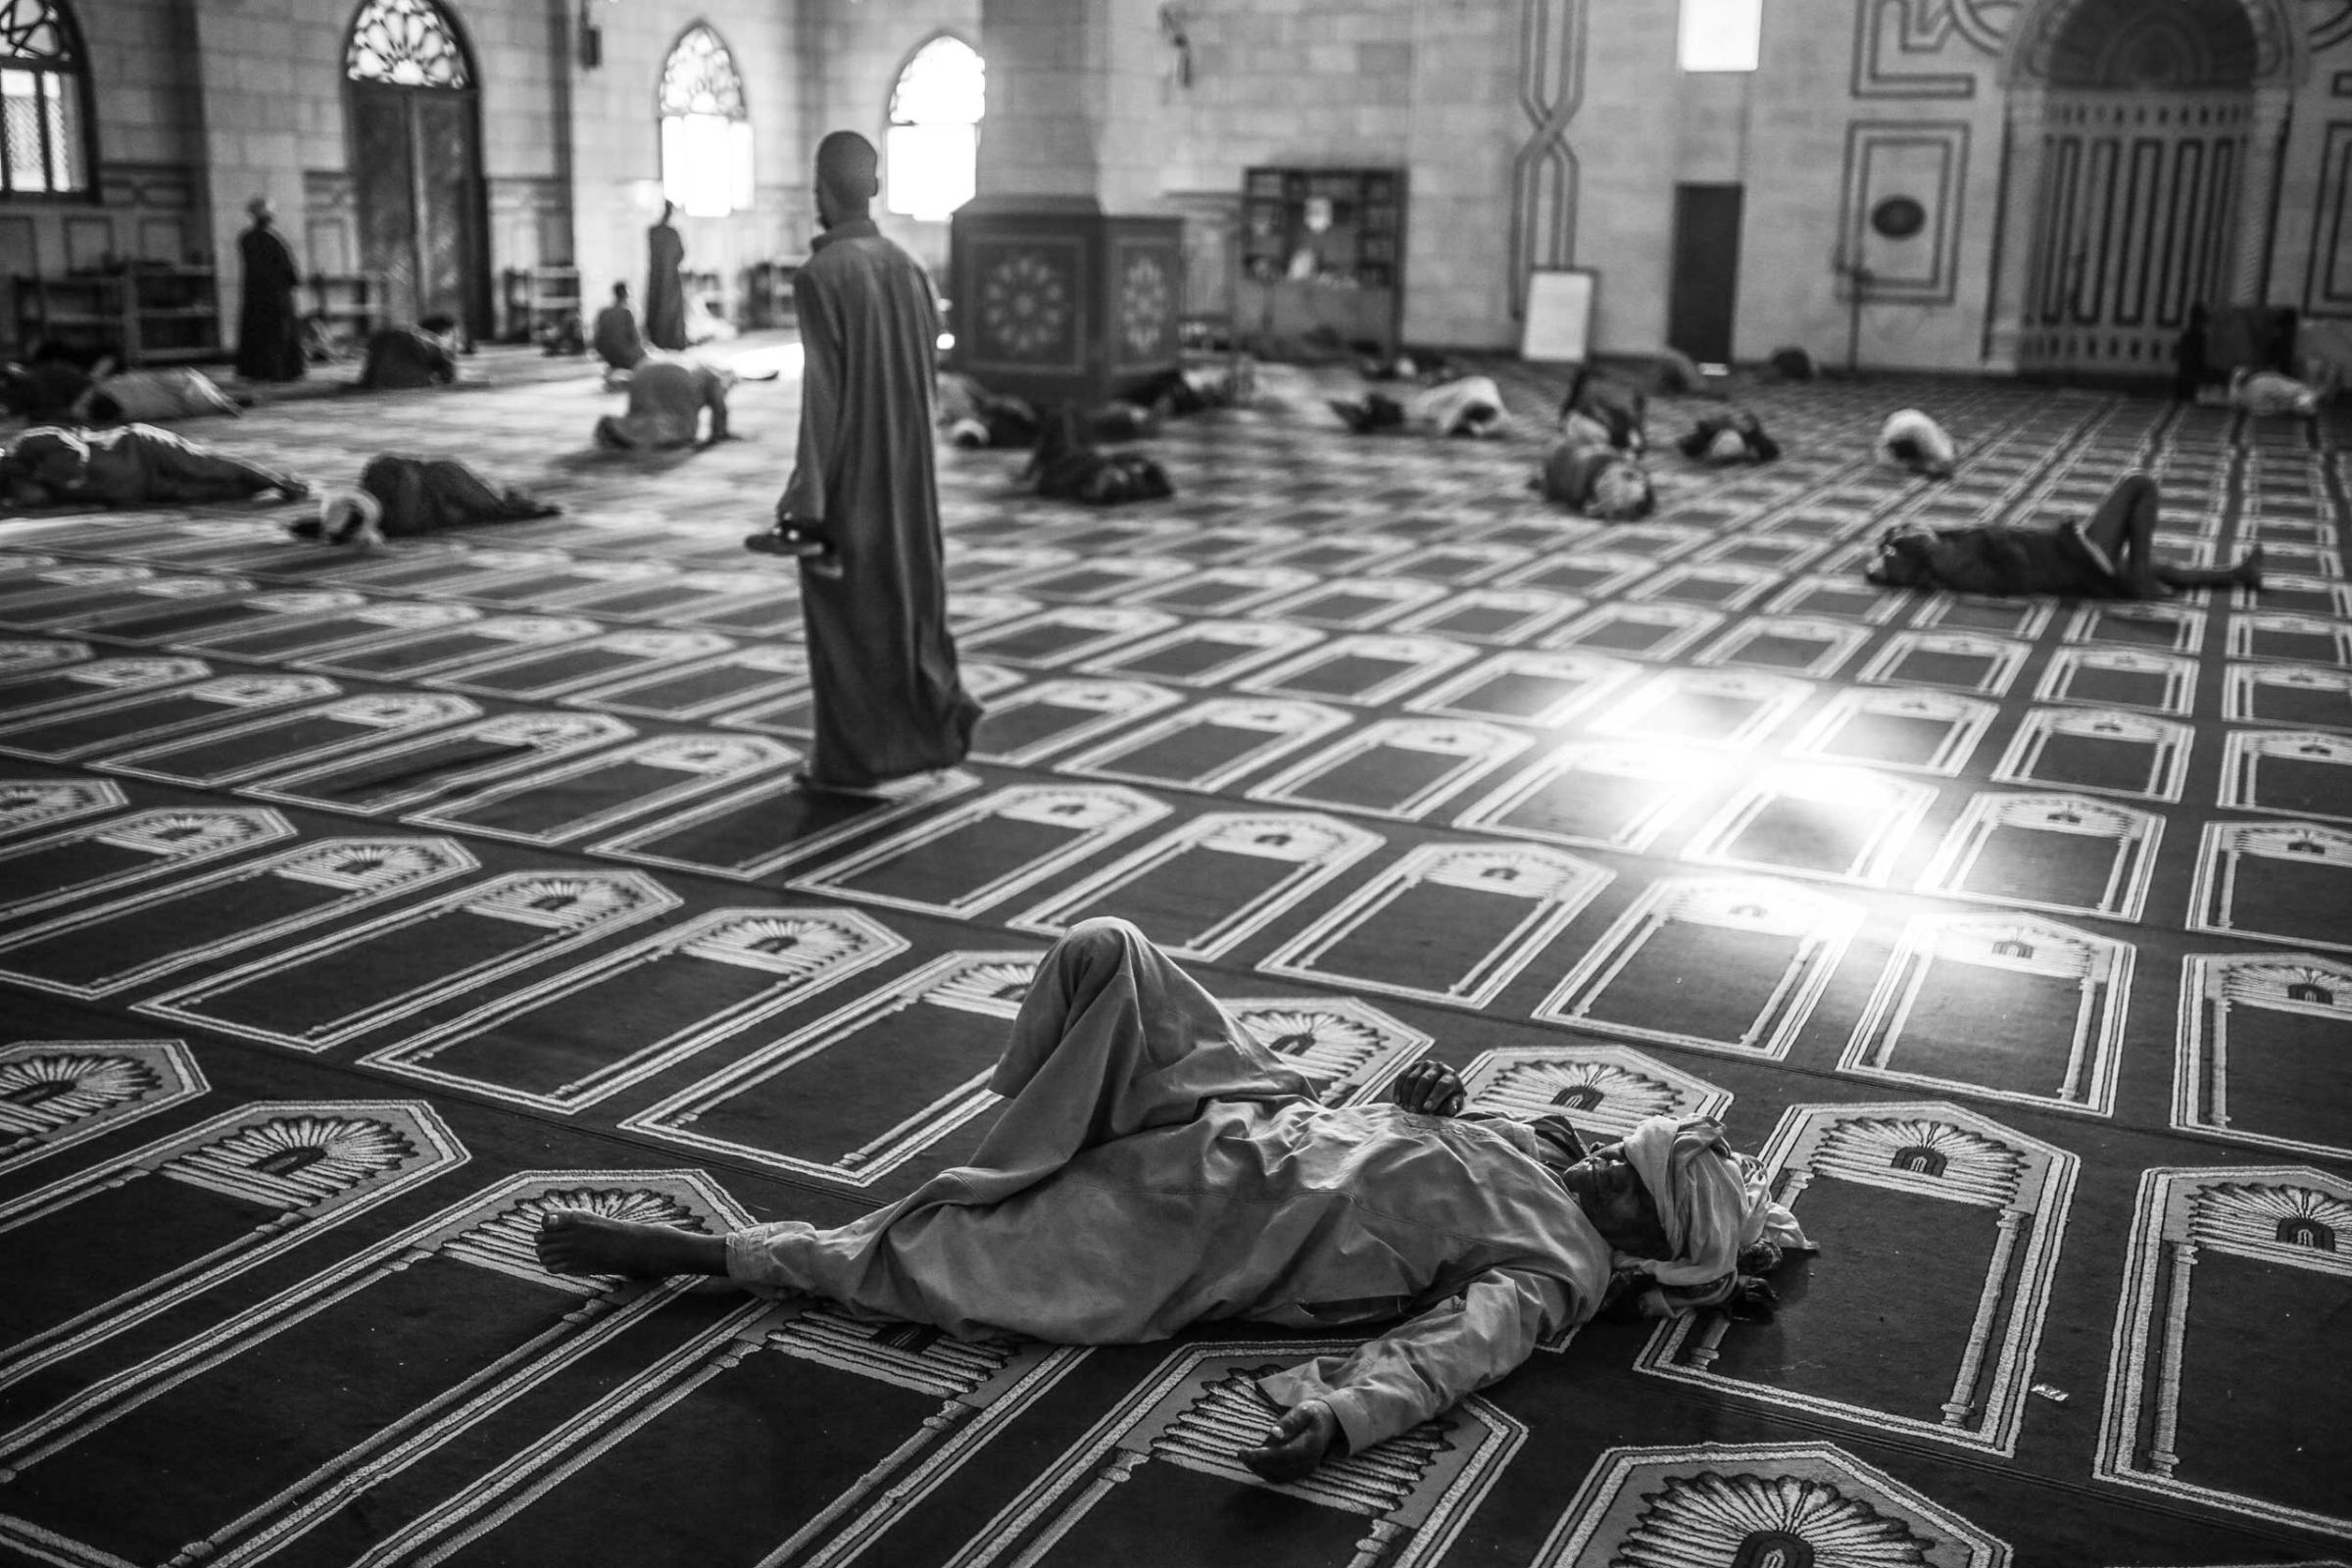 Sufi Muslims take a rest at Abul-Hassan Al-Shazly mosque during the early hours of the morning. Oct. 1, 2014.